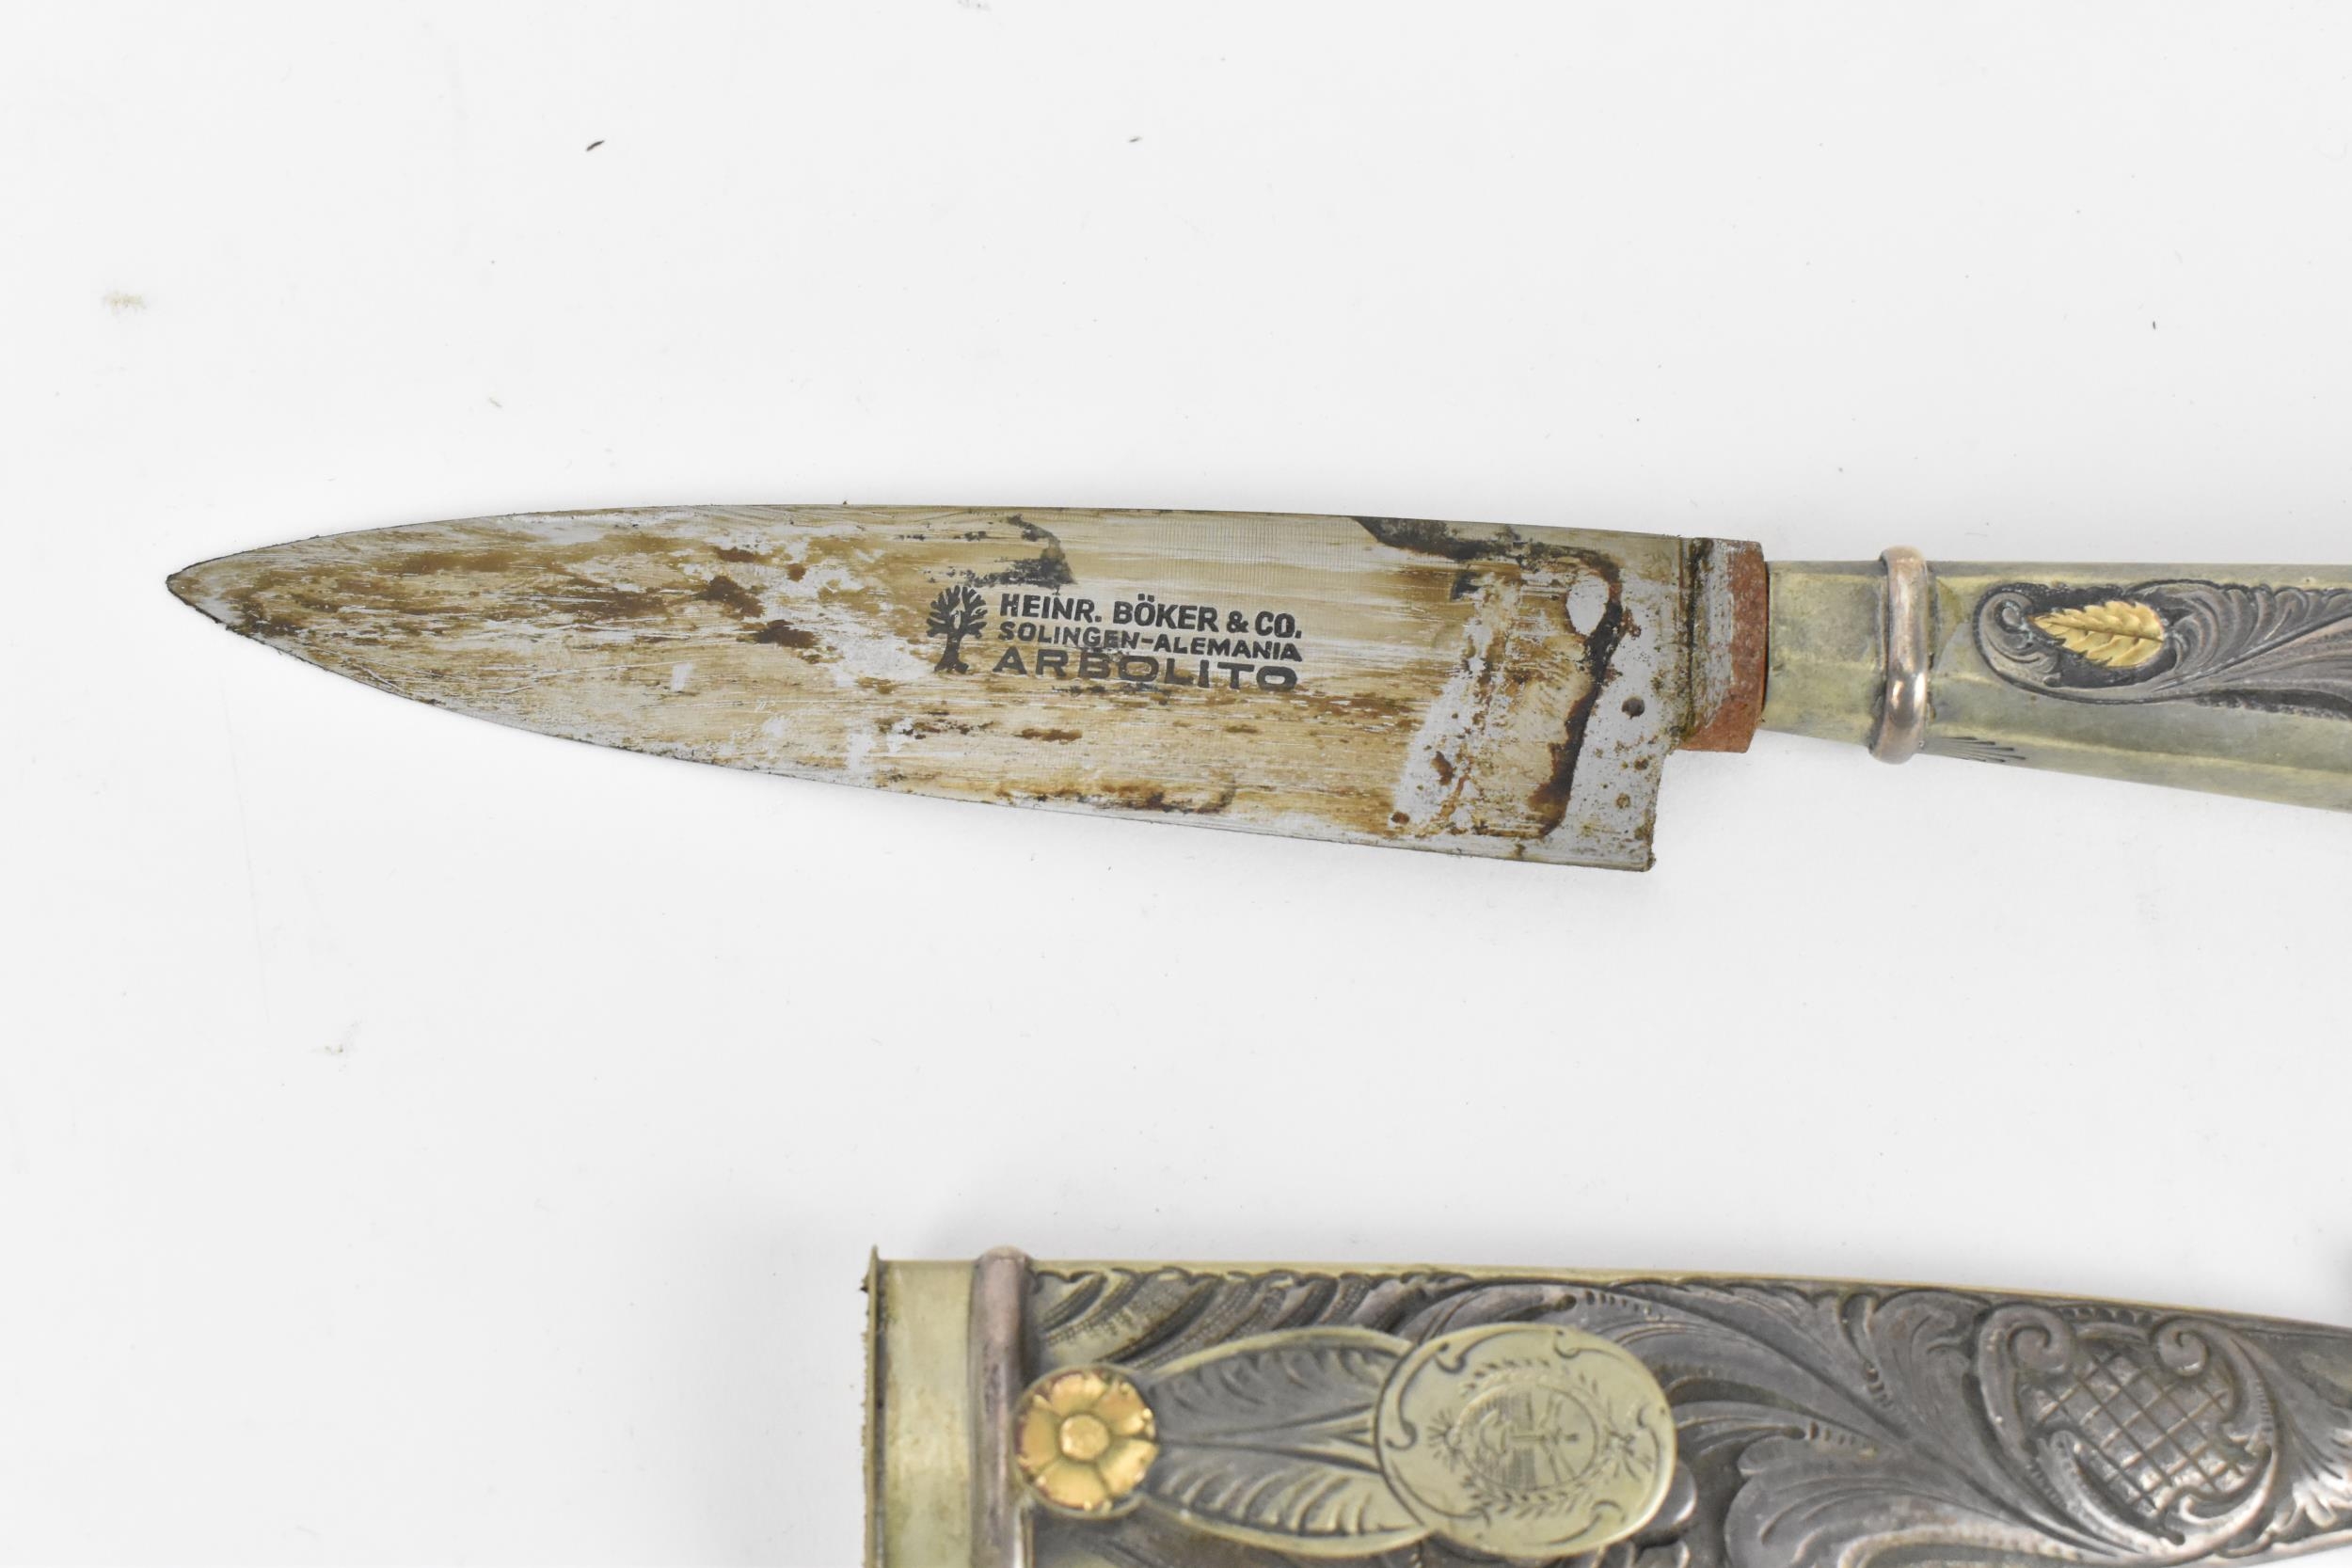 A German Heinr Boker and Co Soligen-Alemania Gaucho knife/dagger, with floral and acanthus etched - Image 5 of 6